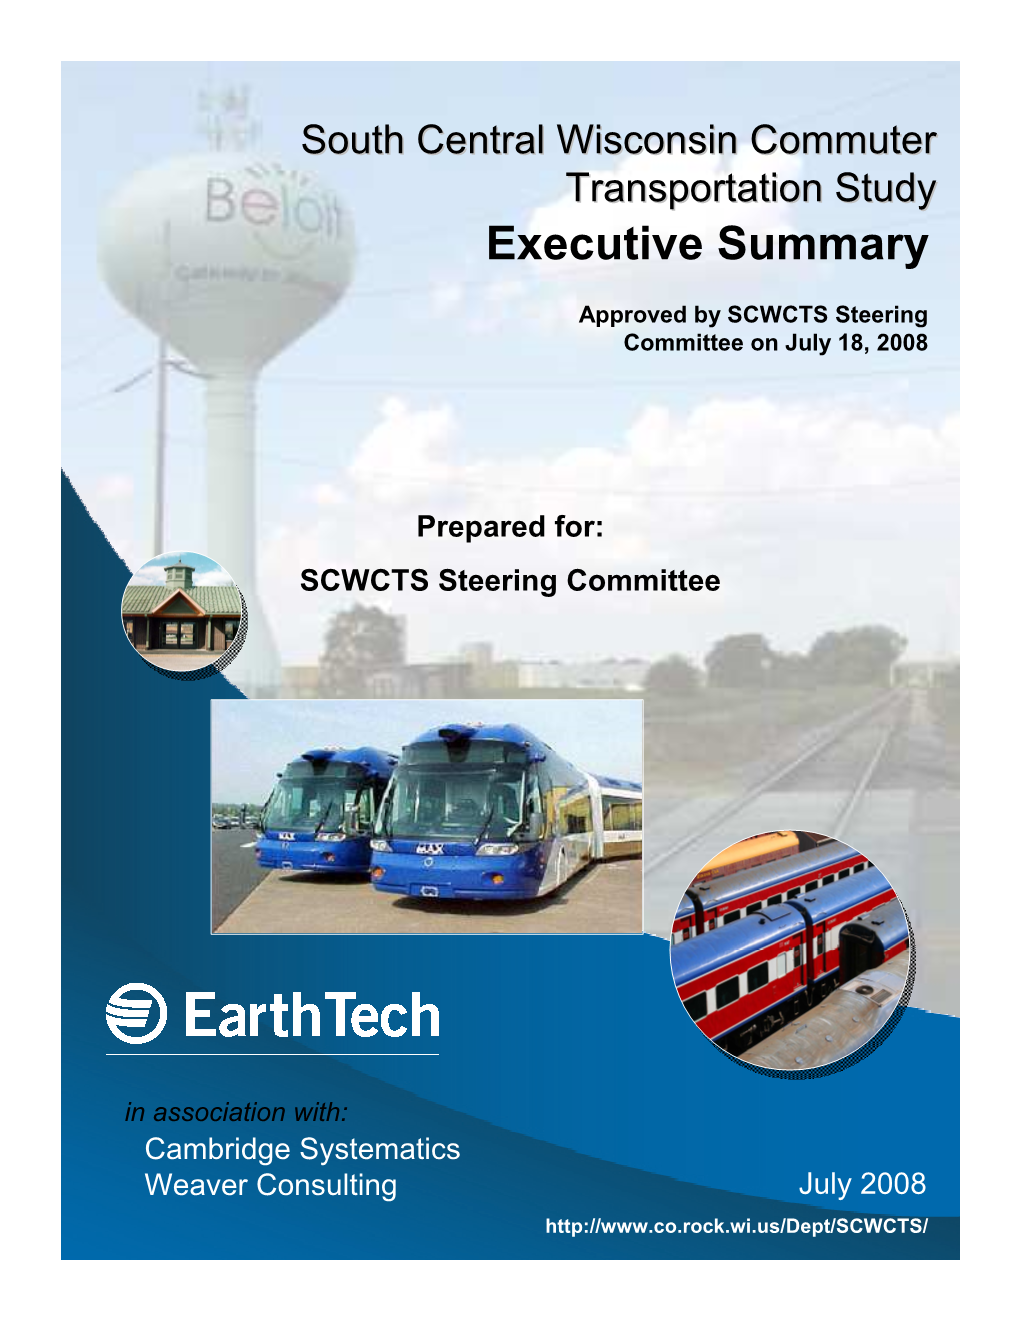 South Central Wisconsin Commuter Transportation Study Executive Summary